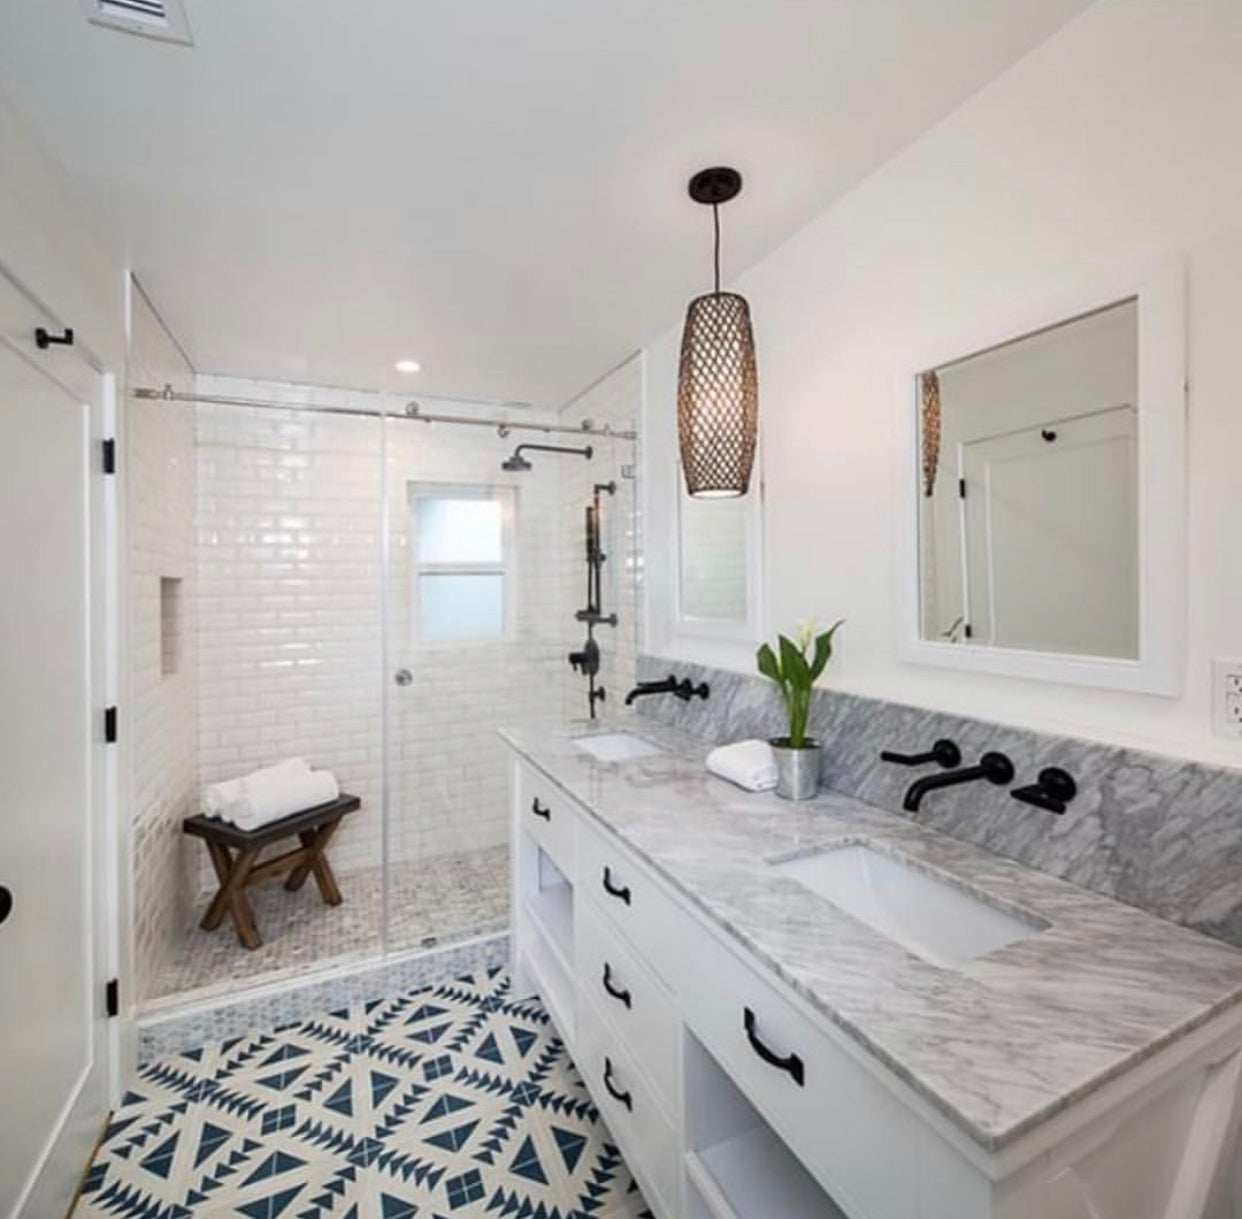 &2 inch white vanity with white shower wall tile and blue and white tile floor, 